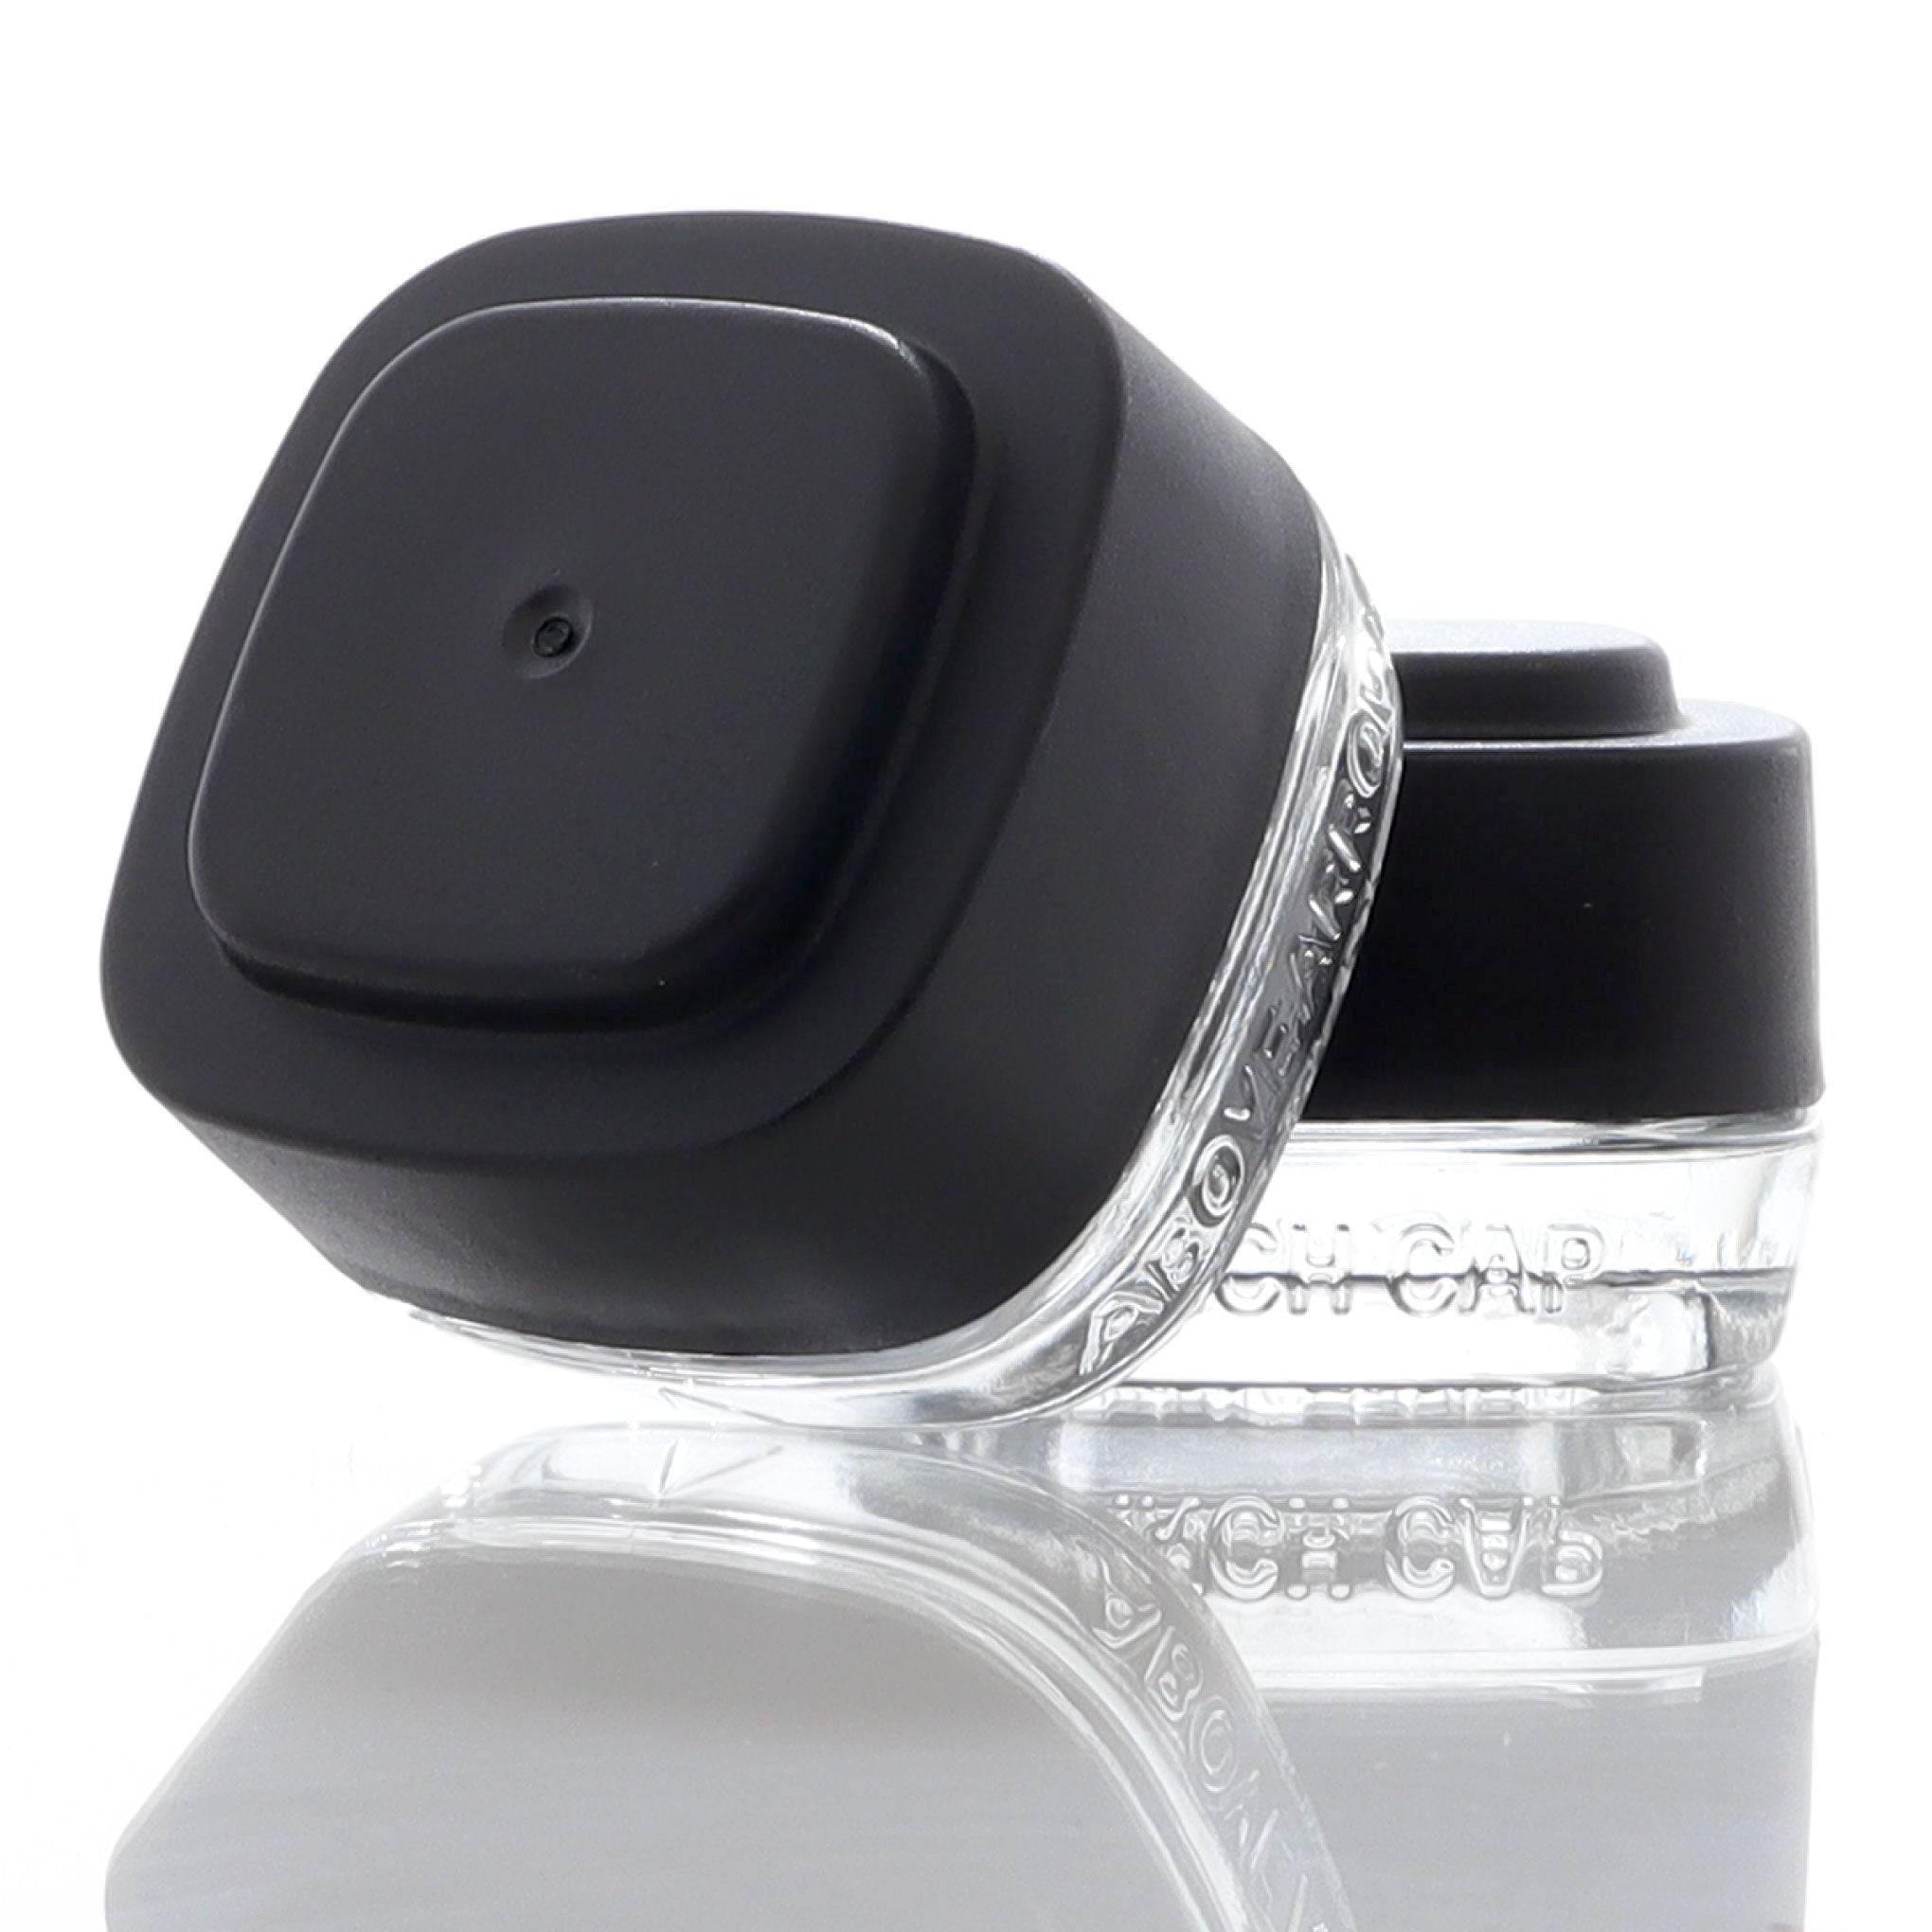 Clear 7ml Calyx concentrate containers with black lids